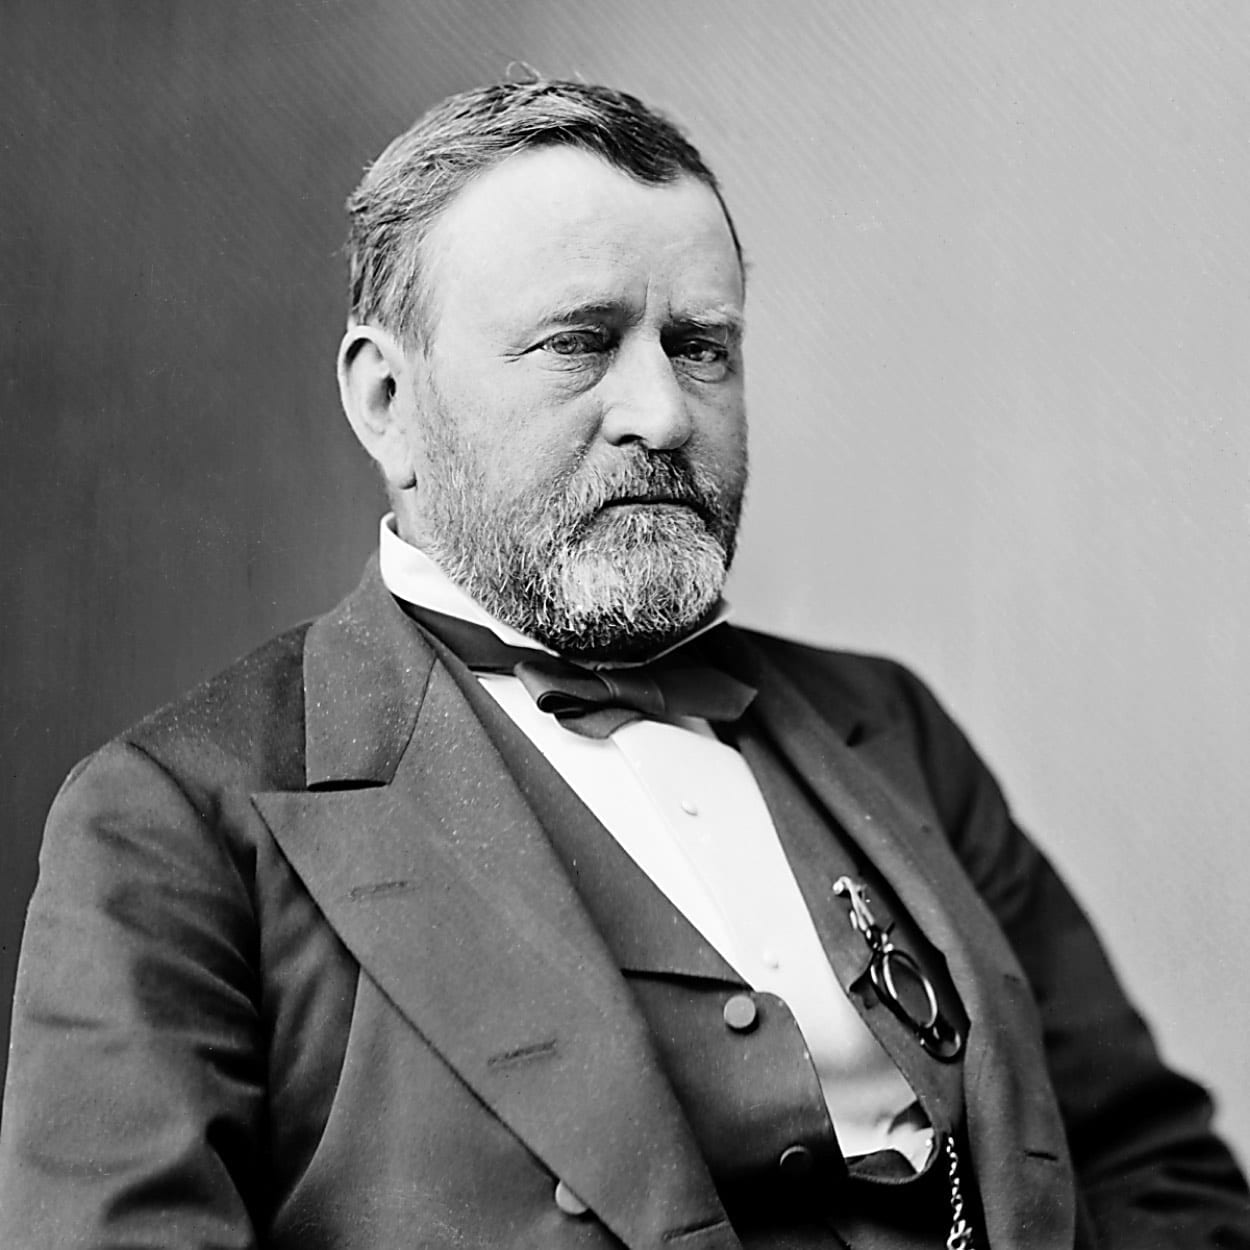 Ulysses S. Grant THE 18TH PRESIDENT OF THE UNITED STATES